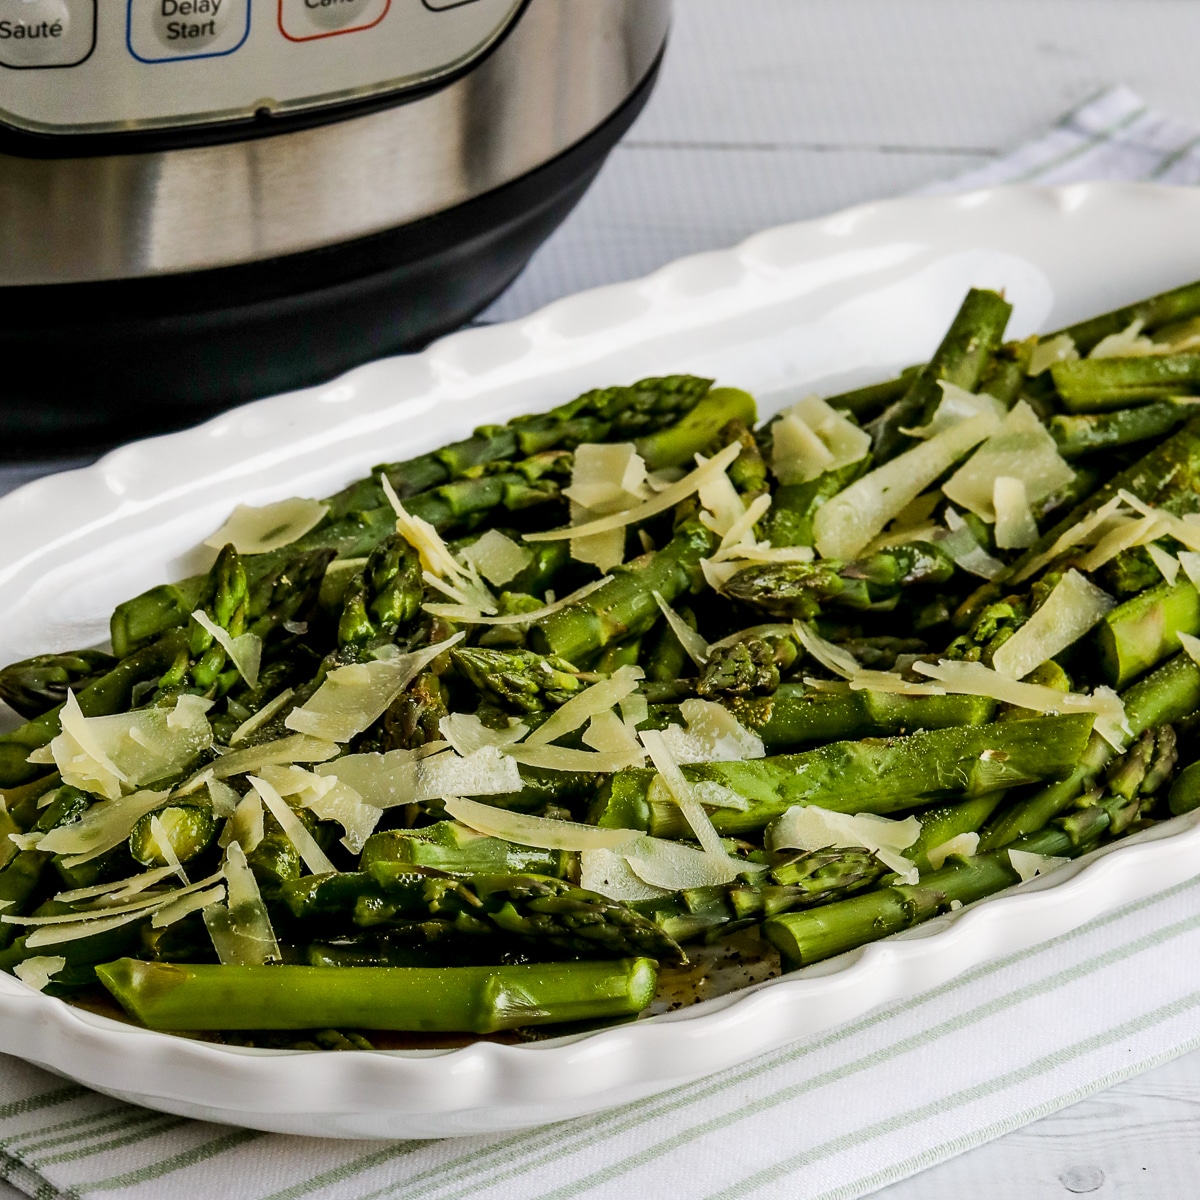 Instant Pot Asparagus shown on serving plate with butter and Parmesan and Instant Pot in back.